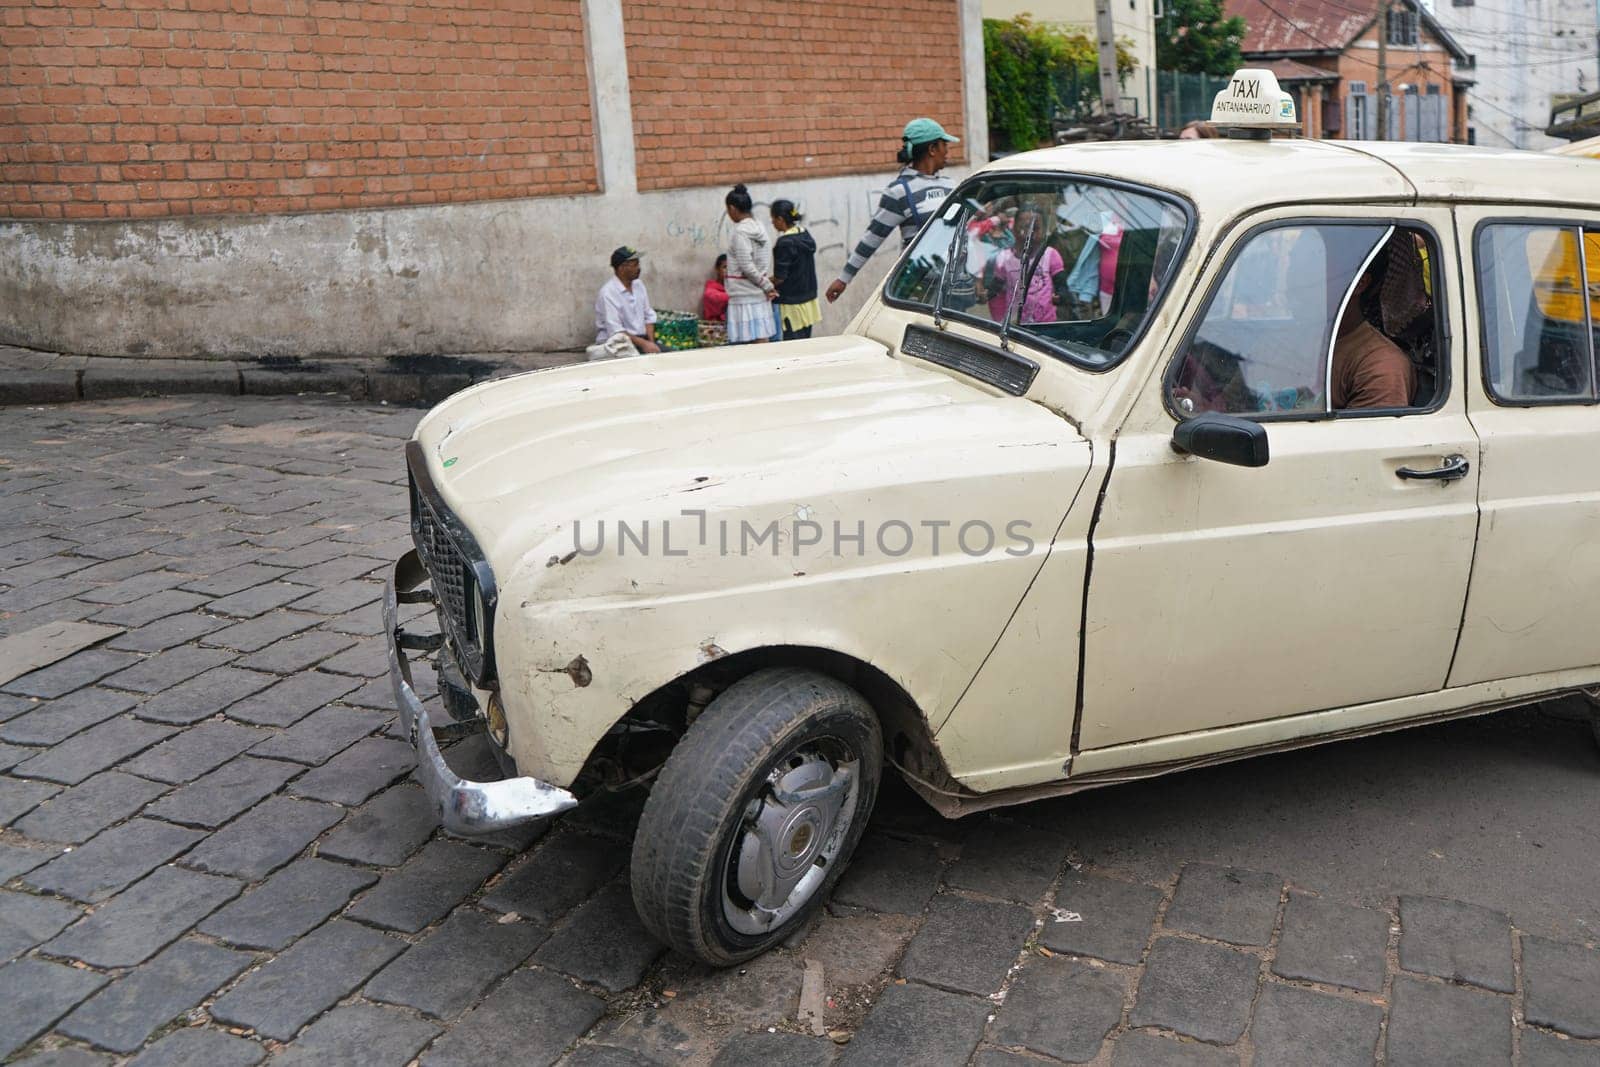 Antananarivo, Madagascar - April 24, 2019: White taxi car driving slowly over tile stone road, group of unknown Malagasy people in background. Madagascar is poor country, most vehicles are worn out